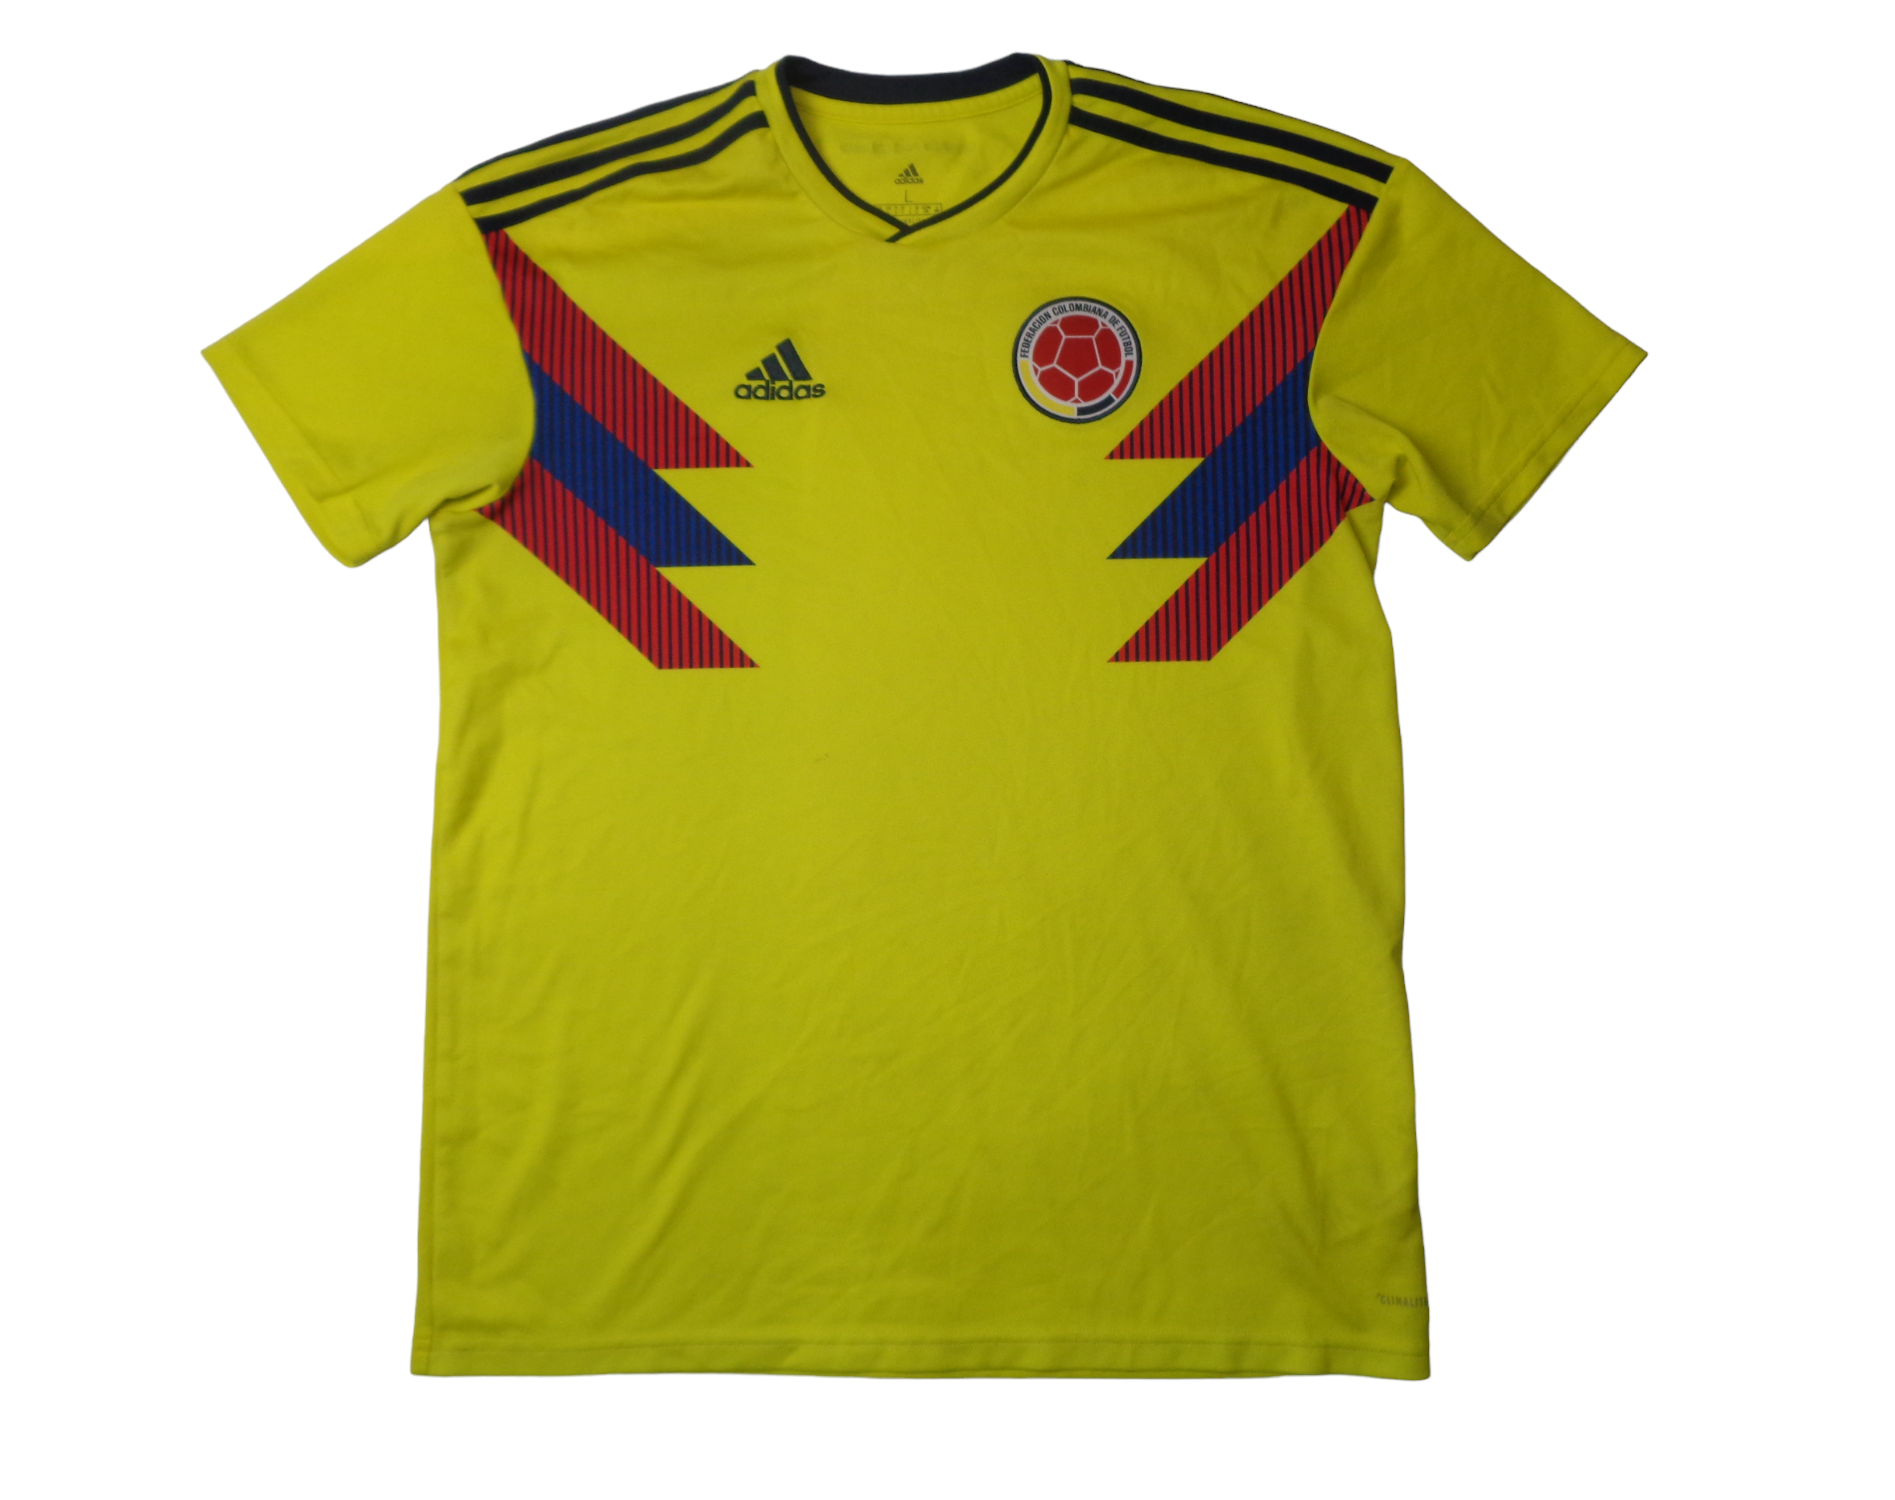 COLOMBIA 2018/19 HOME SHIRT - ADIDAS - SIZE LARGE